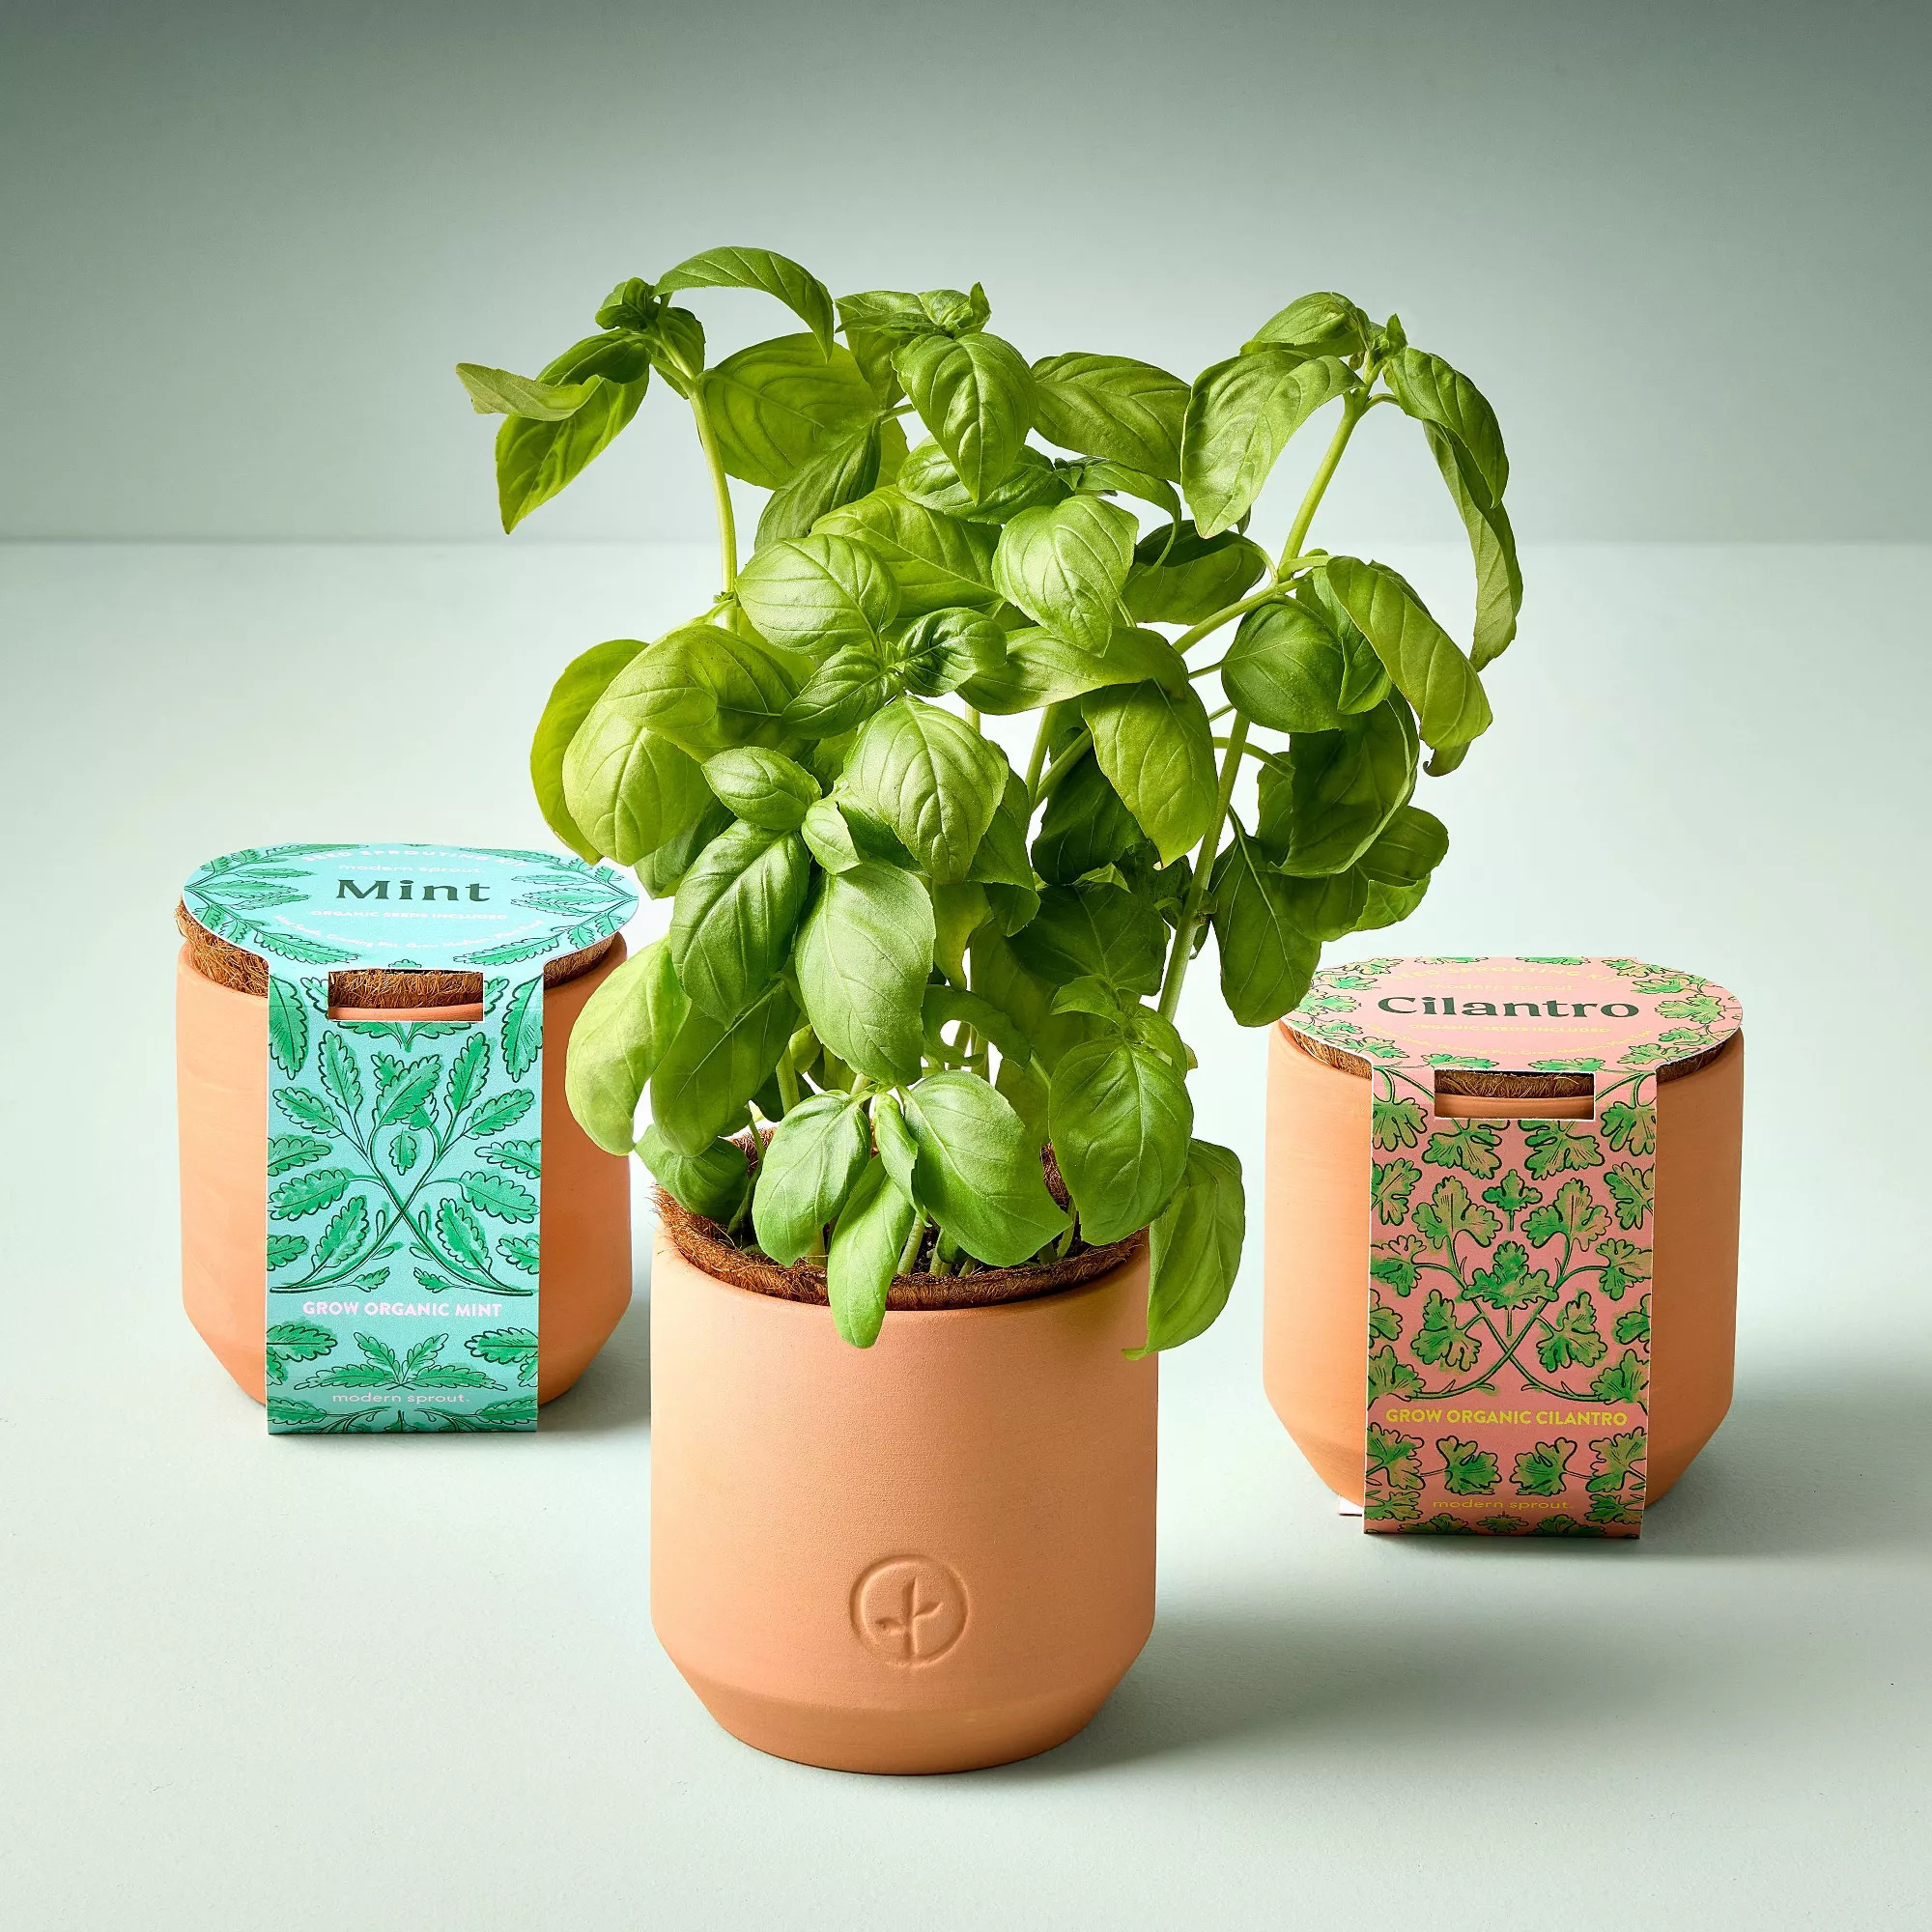 Three herb pots labeled mint, basil, and cilantro with a lush basil plant in the center